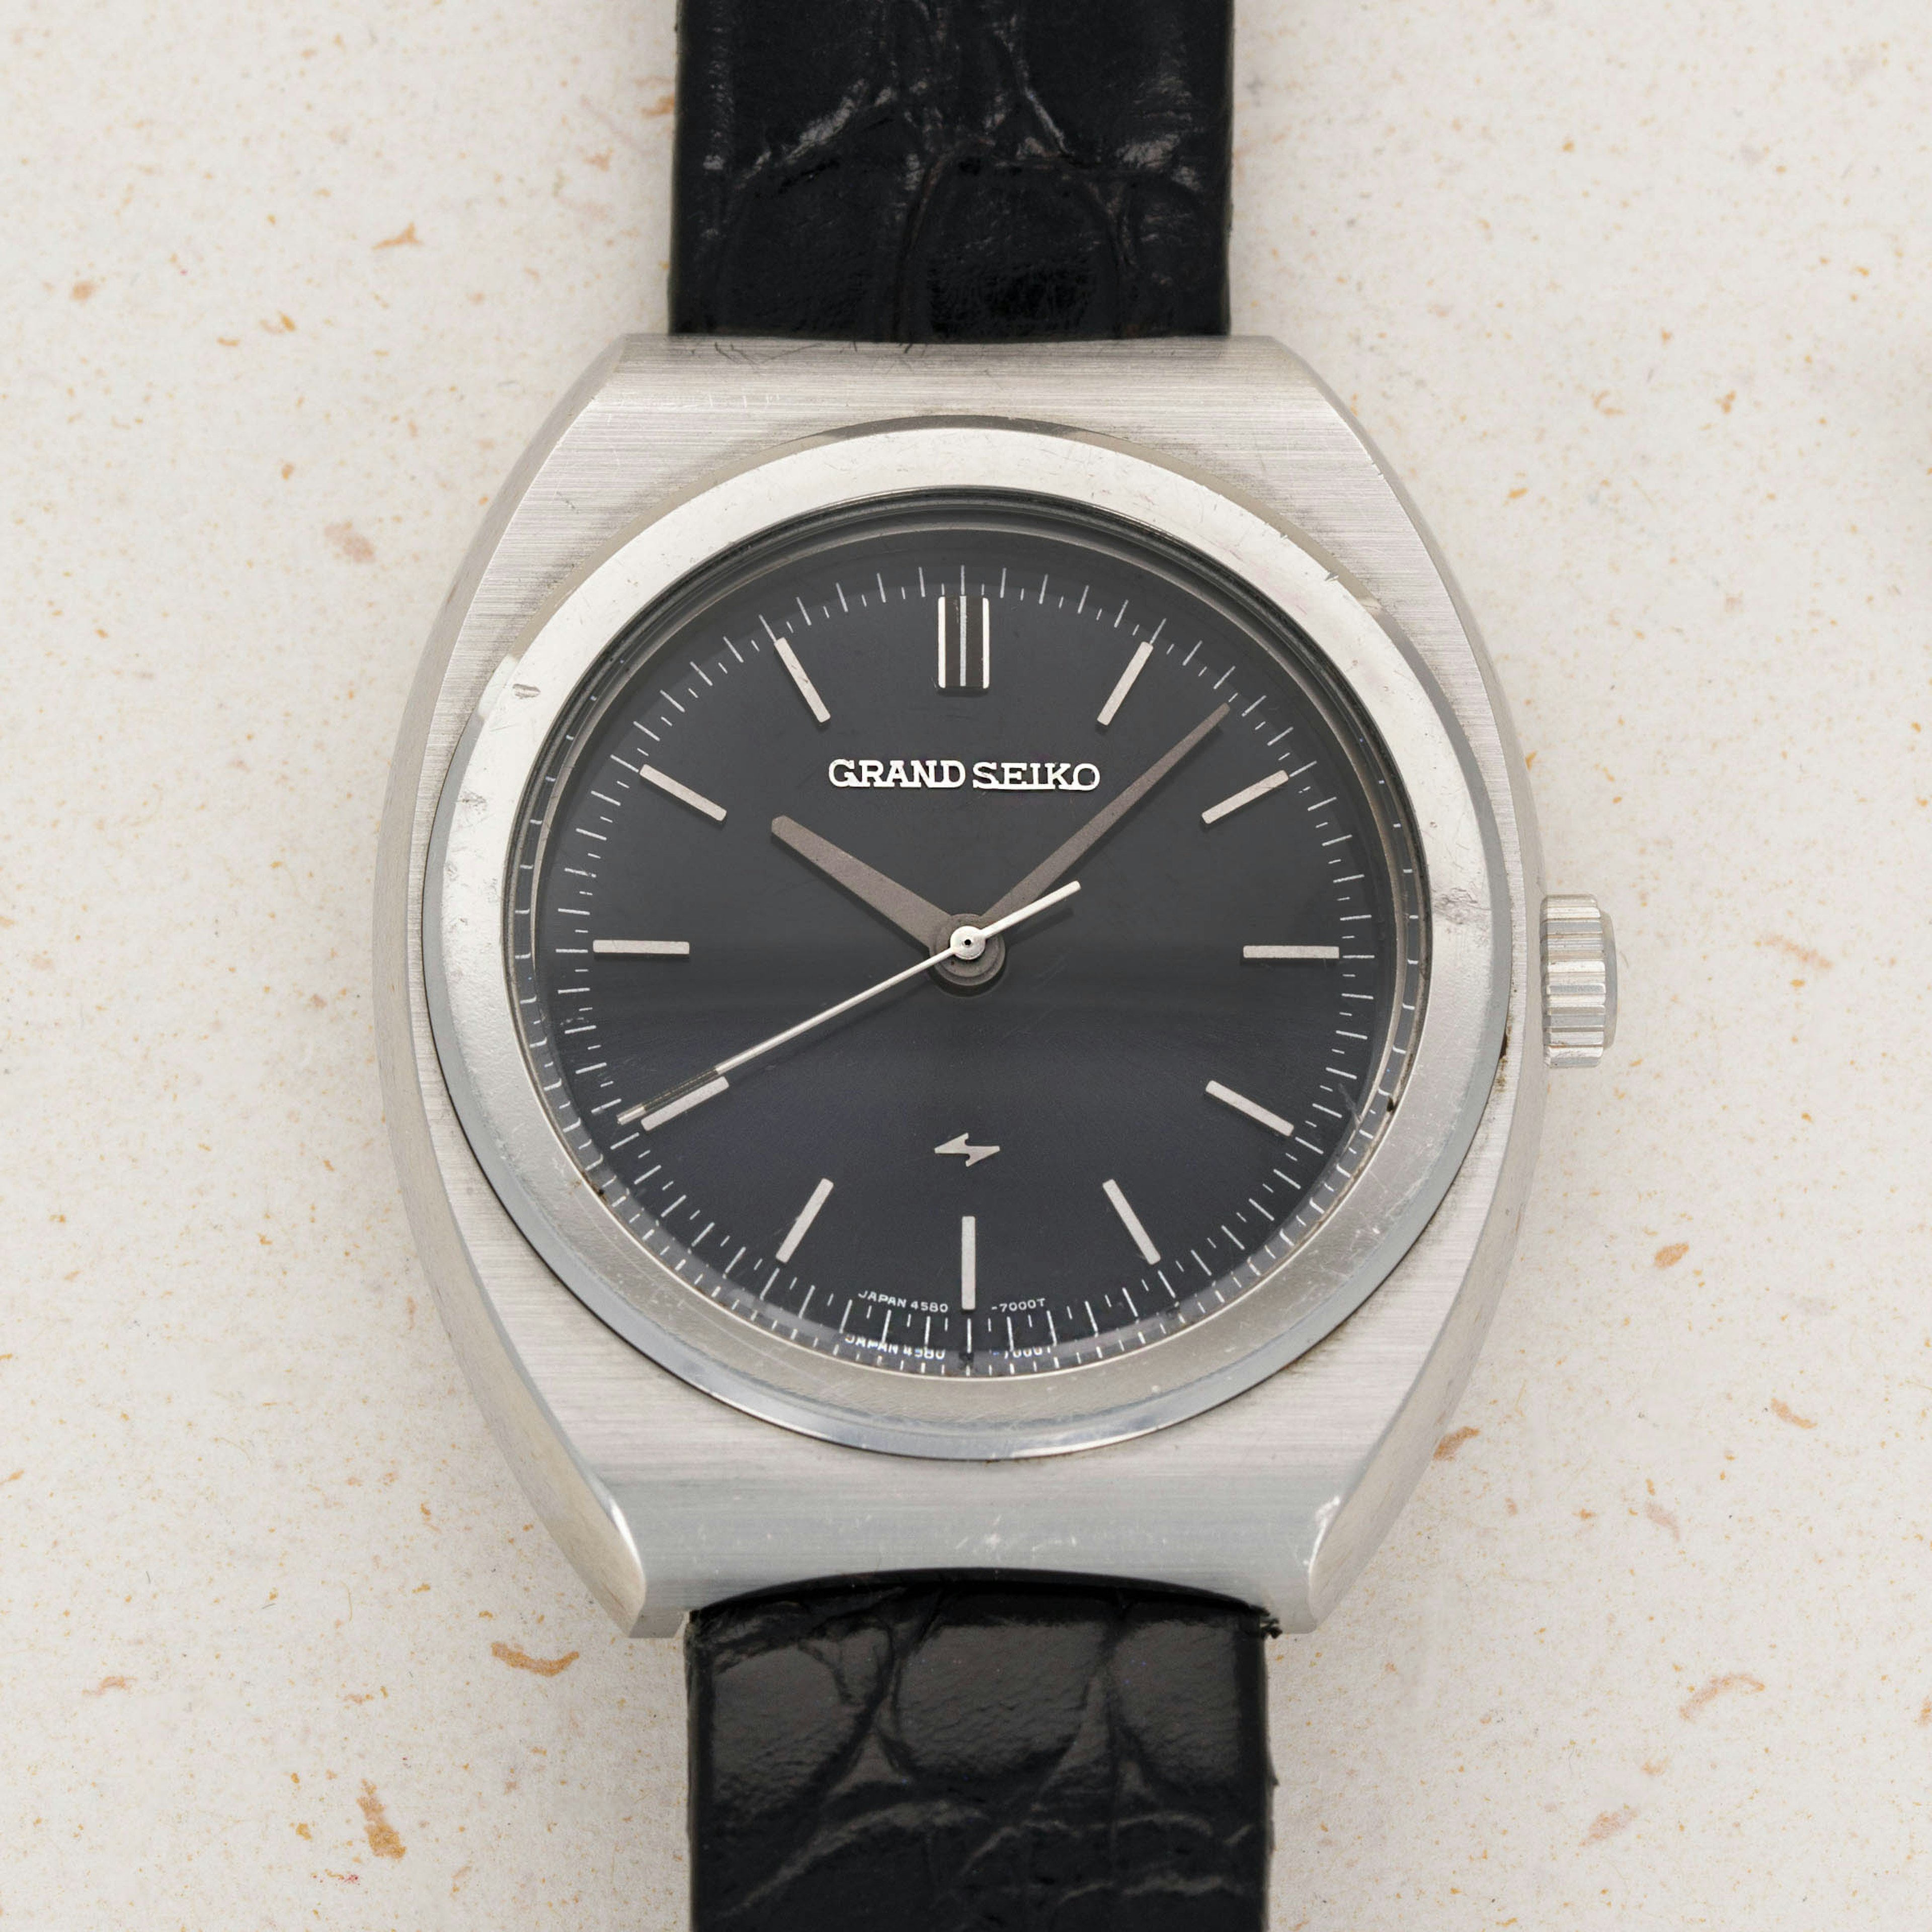 Grand Seiko 4580-7000 VFA | Auctions | Loupe This